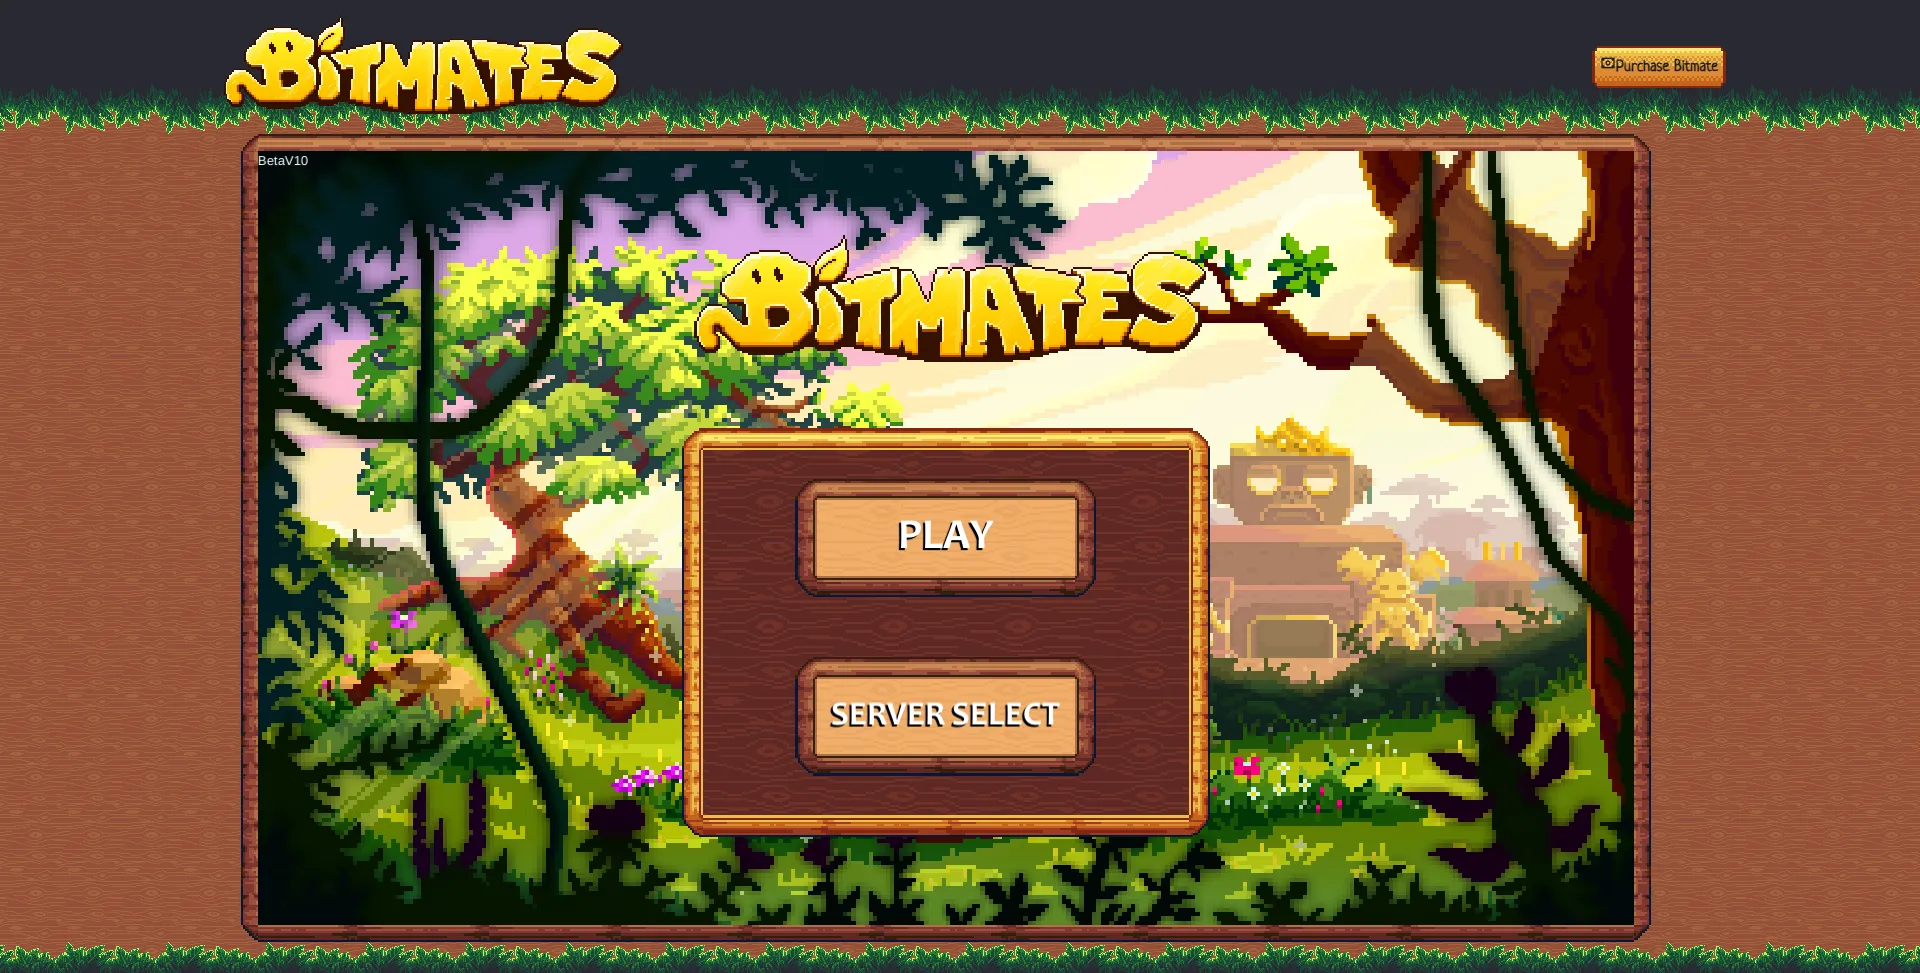 The displayed picture vividly showcases the Bitmates homescreen, which functions as the primary interactive lobby upon opening the application.